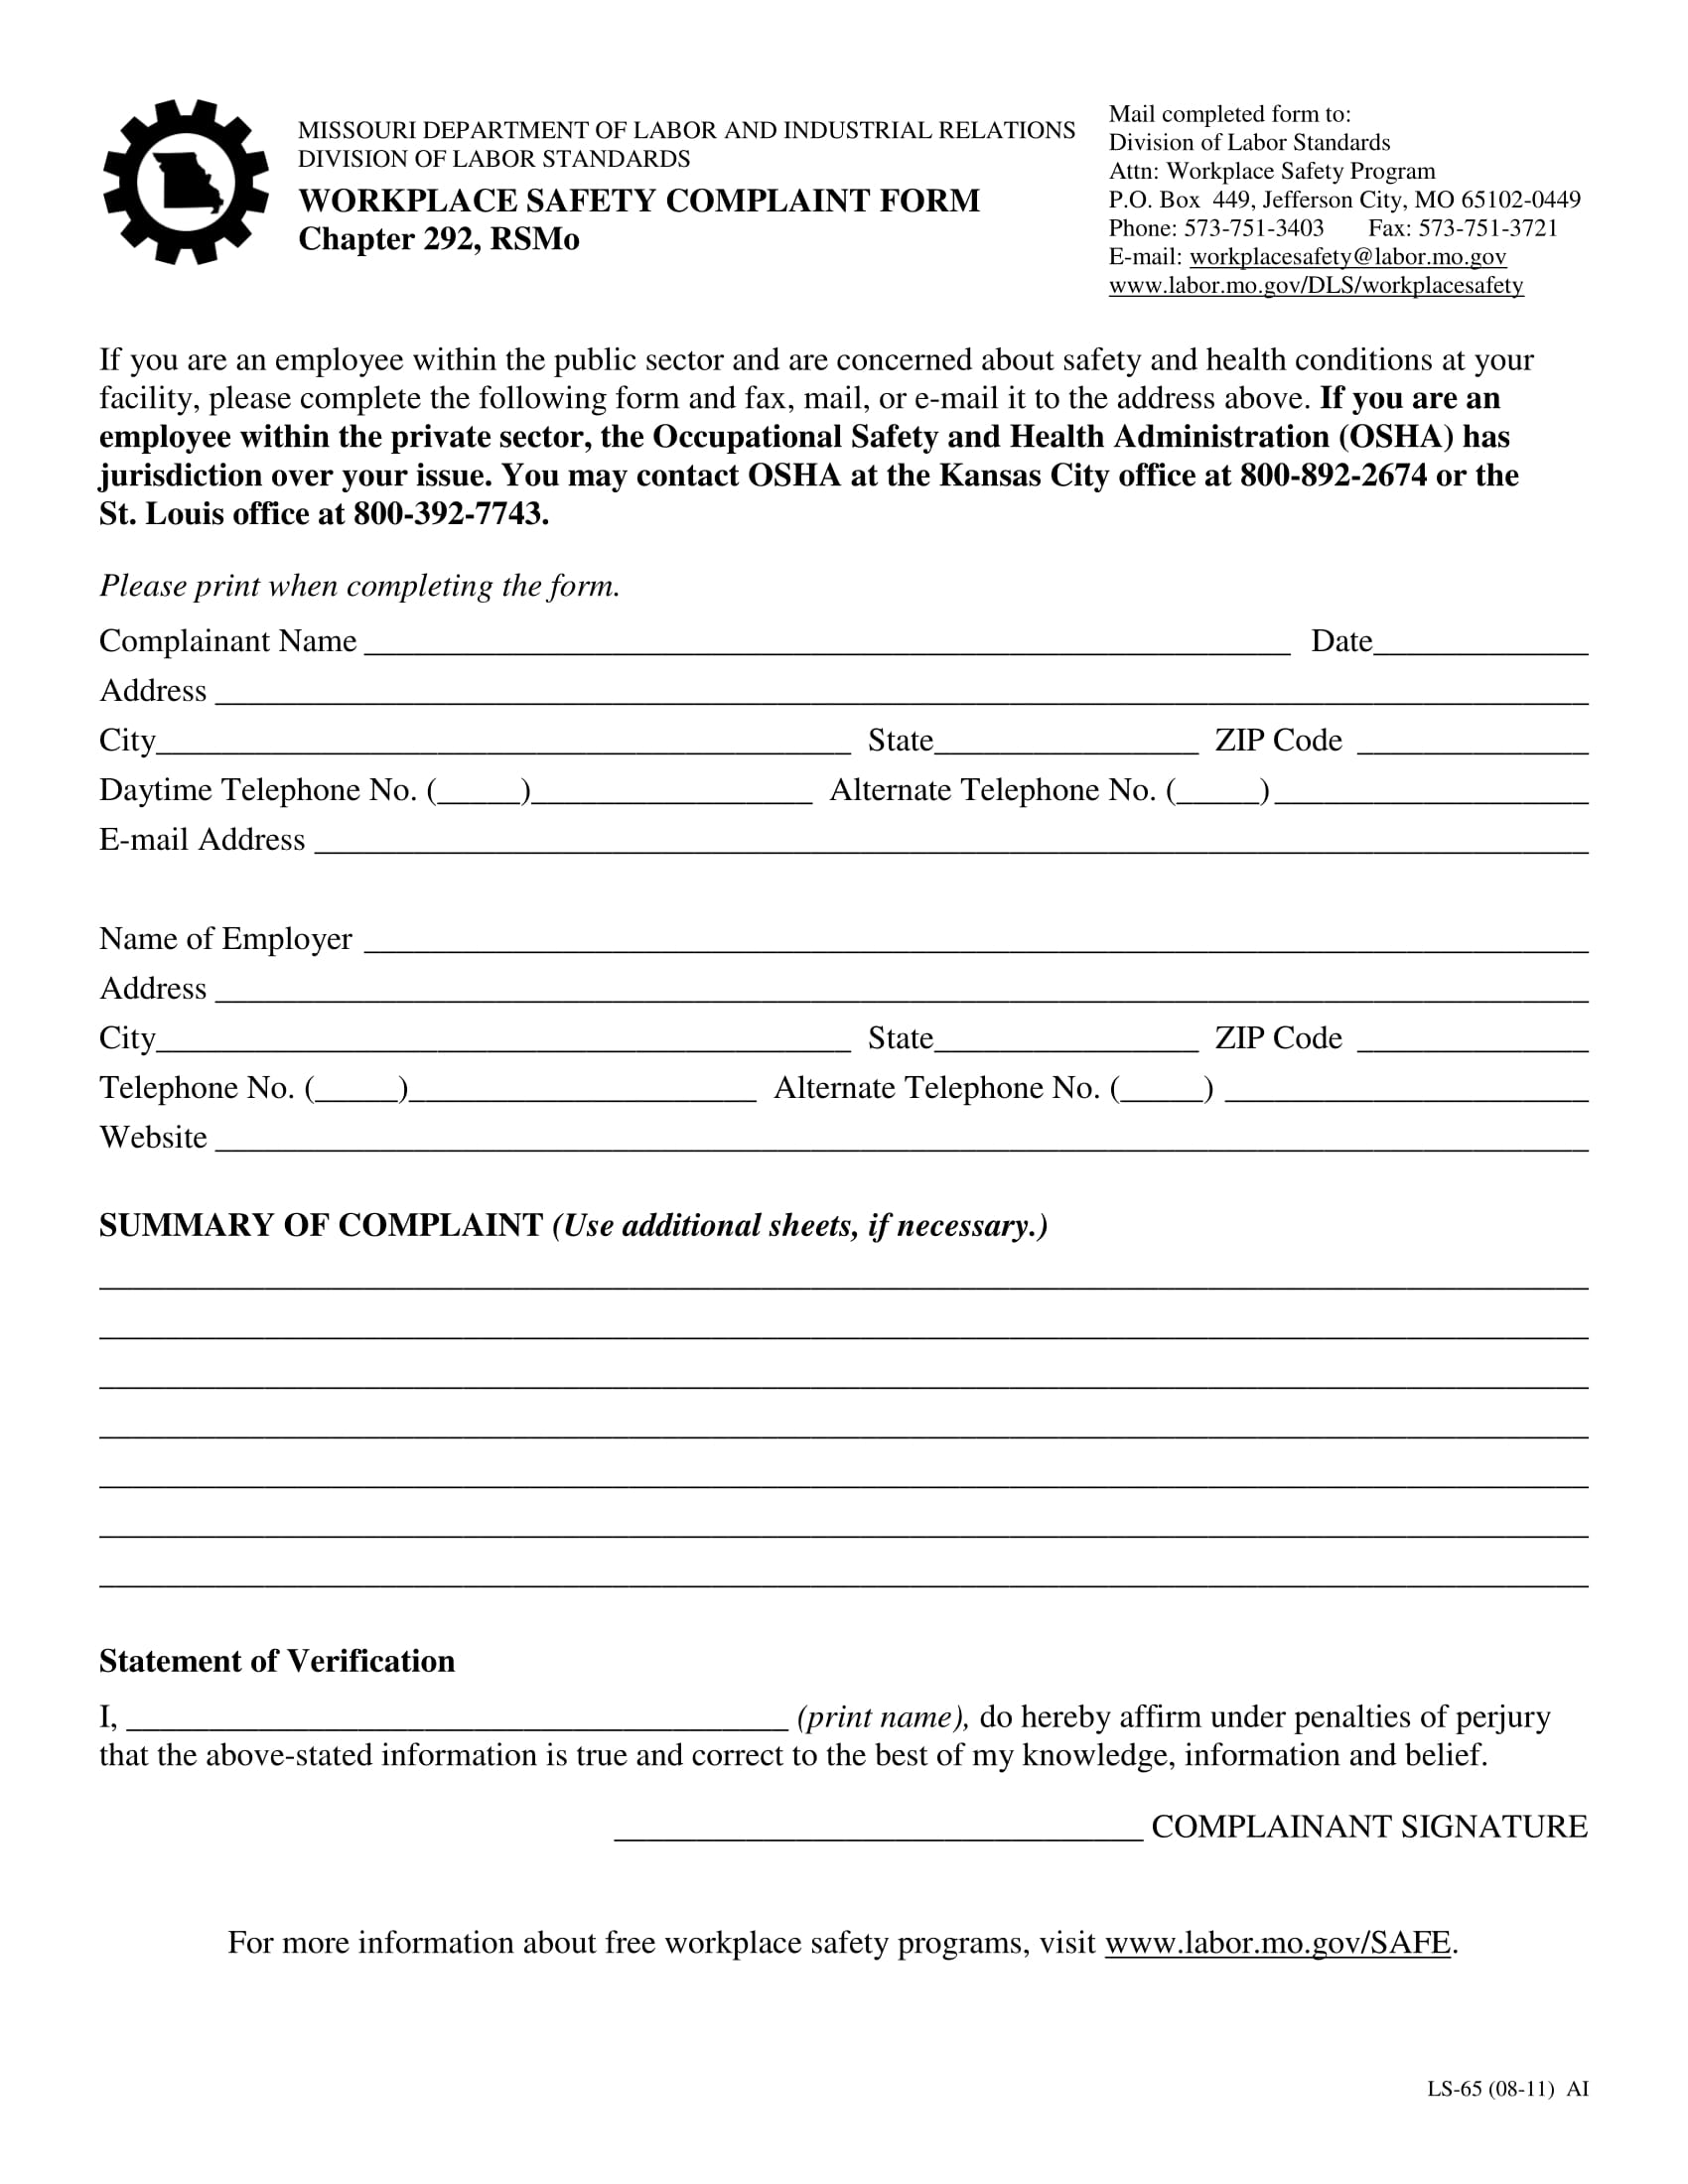 workplace safety complaint form 11